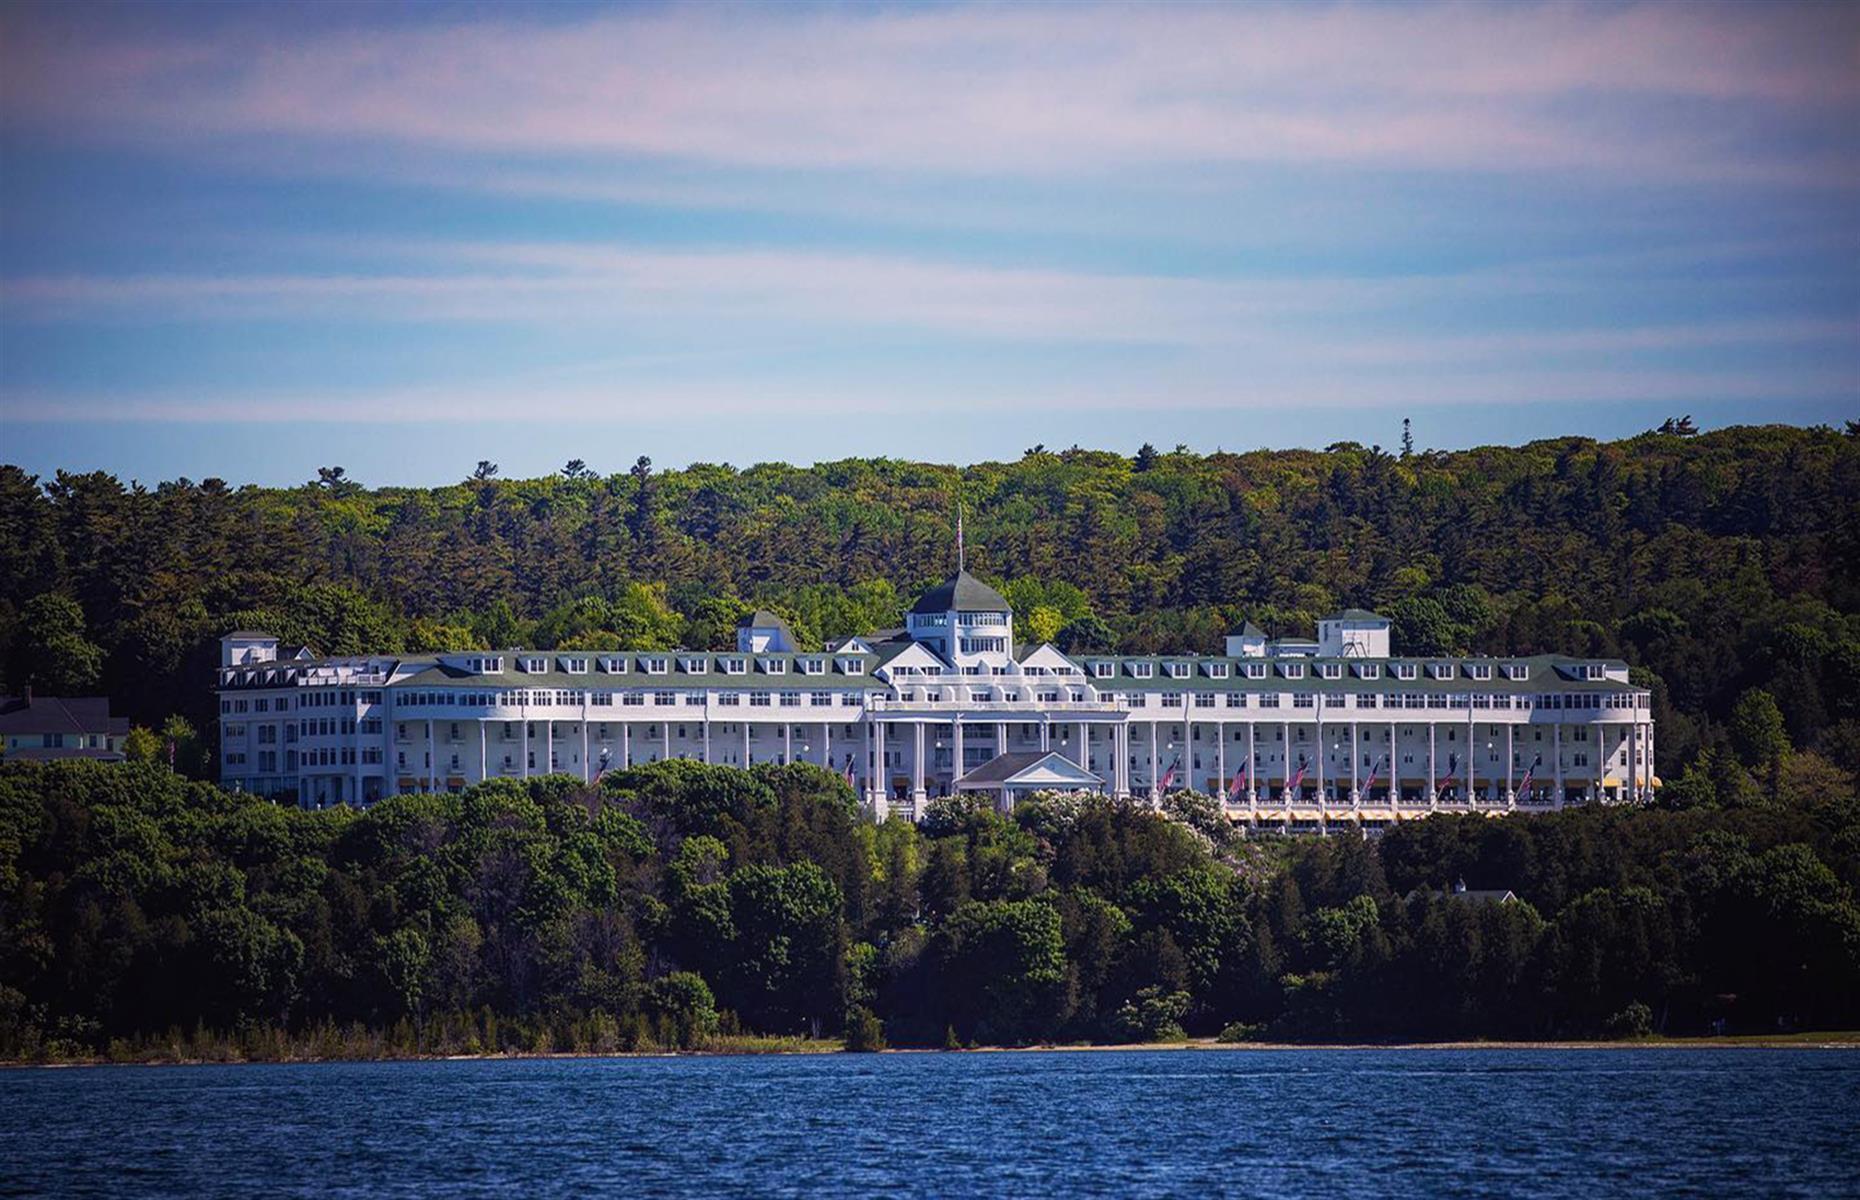 <p>Mackinac Island's <a href="https://www.grandhotel.com/">Grand Hotel</a> proudly tips itself as the "world's largest summer hotel", but it may also be among the most haunted. The hotel opened back in 1887, playing host to movie stars and literary icons like Mark Twain – though today it's equally as well known for its ghostly guests. Over the years, visitors have reported sighting a mysterious black cloud and a smartly dressed specter in a top hat.</p>  <p><a href="https://www.loveexploring.com/galleries/75540/american-hotels-hiding-historic-secrets?page=1"><strong>Take a look at the American hotels hiding historic secrets</strong></a></p>